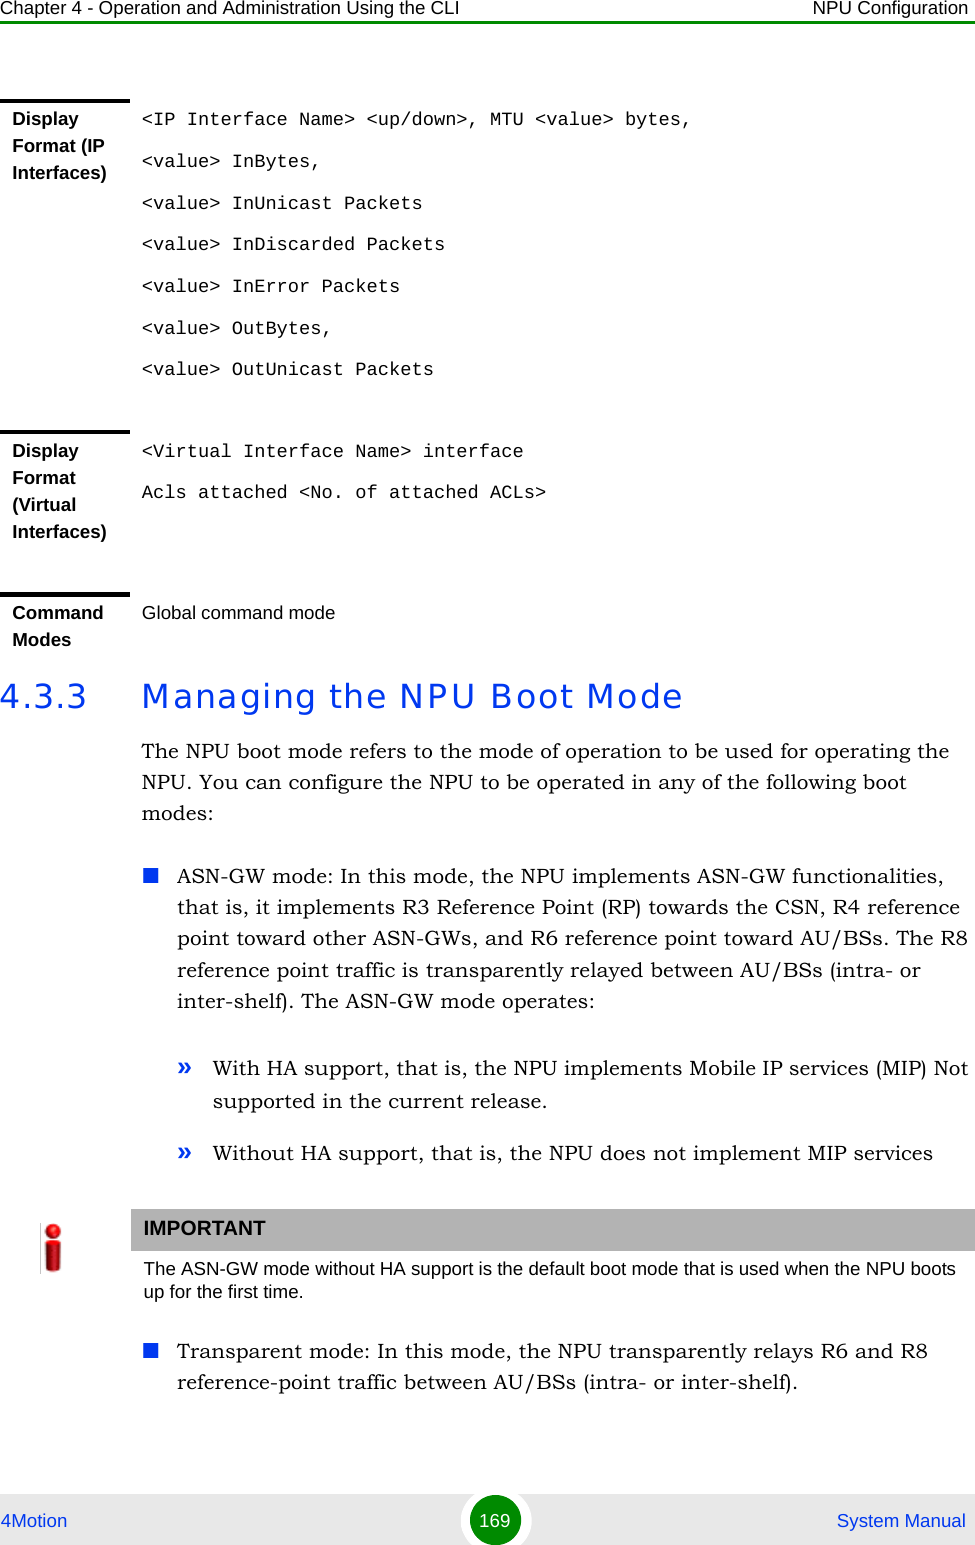 Chapter 4 - Operation and Administration Using the CLI NPU Configuration4Motion 169  System Manual4.3.3 Managing the NPU Boot ModeThe NPU boot mode refers to the mode of operation to be used for operating the NPU. You can configure the NPU to be operated in any of the following boot modes:ASN-GW mode: In this mode, the NPU implements ASN-GW functionalities, that is, it implements R3 Reference Point (RP) towards the CSN, R4 reference point toward other ASN-GWs, and R6 reference point toward AU/BSs. The R8 reference point traffic is transparently relayed between AU/BSs (intra- or inter-shelf). The ASN-GW mode operates:»With HA support, that is, the NPU implements Mobile IP services (MIP) Not supported in the current release.»Without HA support, that is, the NPU does not implement MIP servicesTransparent mode: In this mode, the NPU transparently relays R6 and R8 reference-point traffic between AU/BSs (intra- or inter-shelf).Display Format (IP Interfaces)&lt;IP Interface Name&gt; &lt;up/down&gt;, MTU &lt;value&gt; bytes, &lt;value&gt; InBytes, &lt;value&gt; InUnicast Packets &lt;value&gt; InDiscarded Packets&lt;value&gt; InError Packets &lt;value&gt; OutBytes, &lt;value&gt; OutUnicast Packets Display Format (Virtual Interfaces)&lt;Virtual Interface Name&gt; interfaceAcls attached &lt;No. of attached ACLs&gt;Command ModesGlobal command modeIMPORTANTThe ASN-GW mode without HA support is the default boot mode that is used when the NPU boots up for the first time.